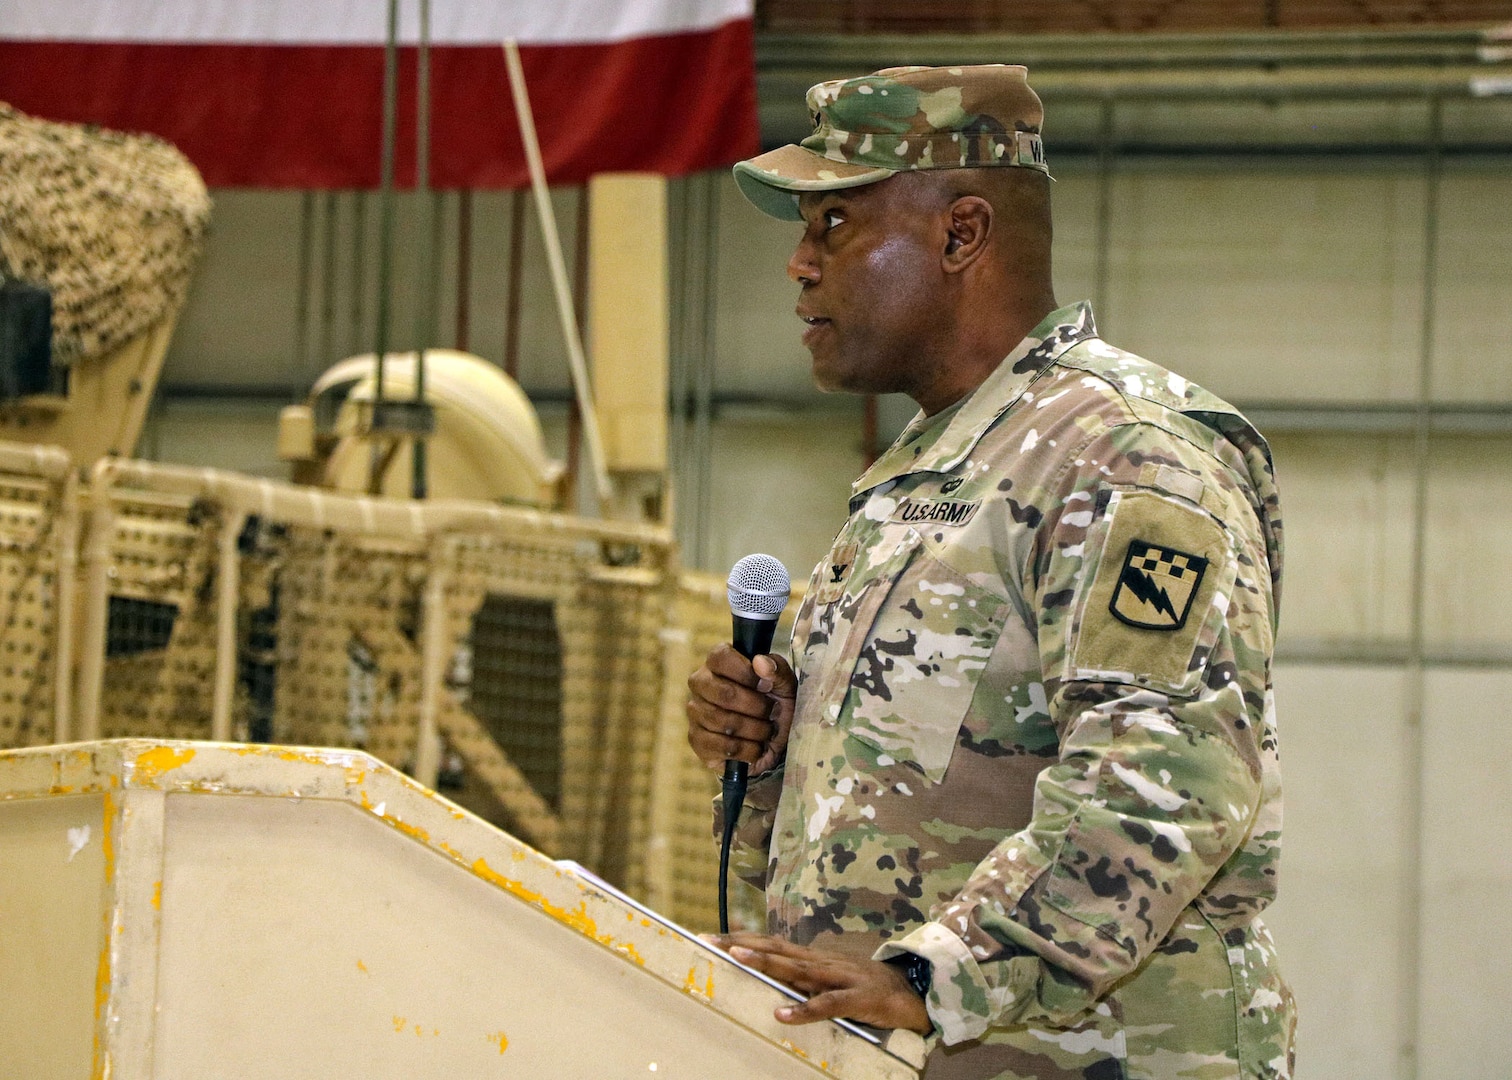 BAGRAM AIRFIELD, Afghanistan (Mar. 26, 2017) - U.S. Army Col. James E. Walker, Task Force Lightning/525th Expeditionary Military Intelligence Brigade commander, thanks the service members and guests who attended today's transfer of authority ceremony. Walker reported the Soldiers of 525th E-MIB were trained and ready for the mission ahead.  TF Lightning assumed the Afghanistan-theater Intelligence, Surveillance, and Reconnaissance mission from TF ODIN.  Photo by Jet Fabara, U.S. Forces Afghanistan Public Affairs.